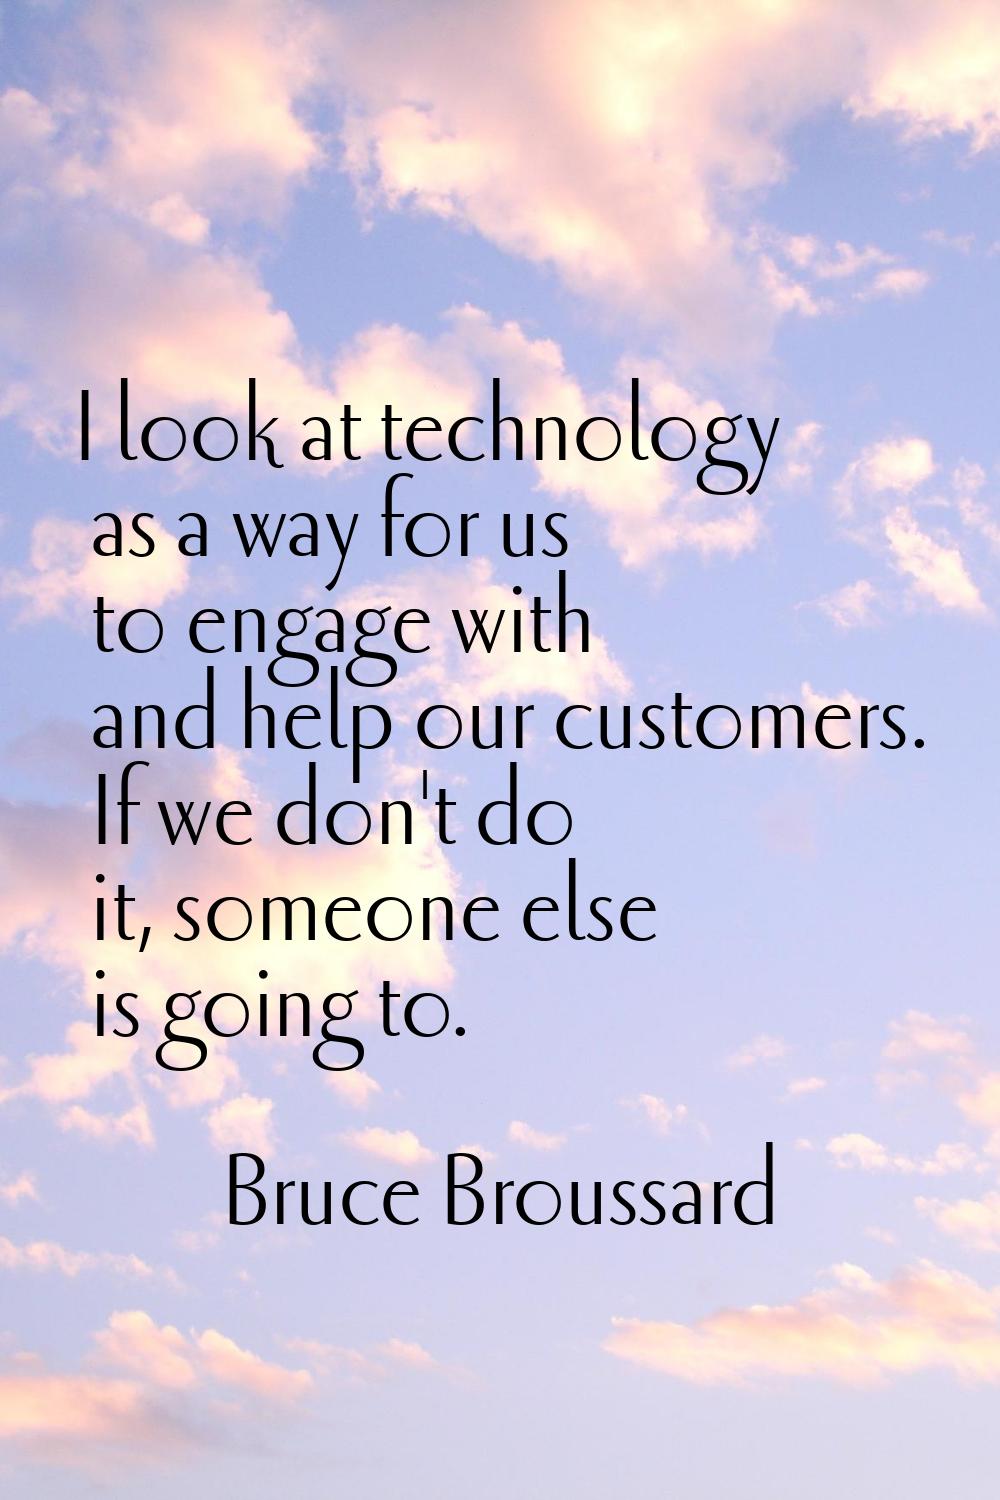 I look at technology as a way for us to engage with and help our customers. If we don't do it, some